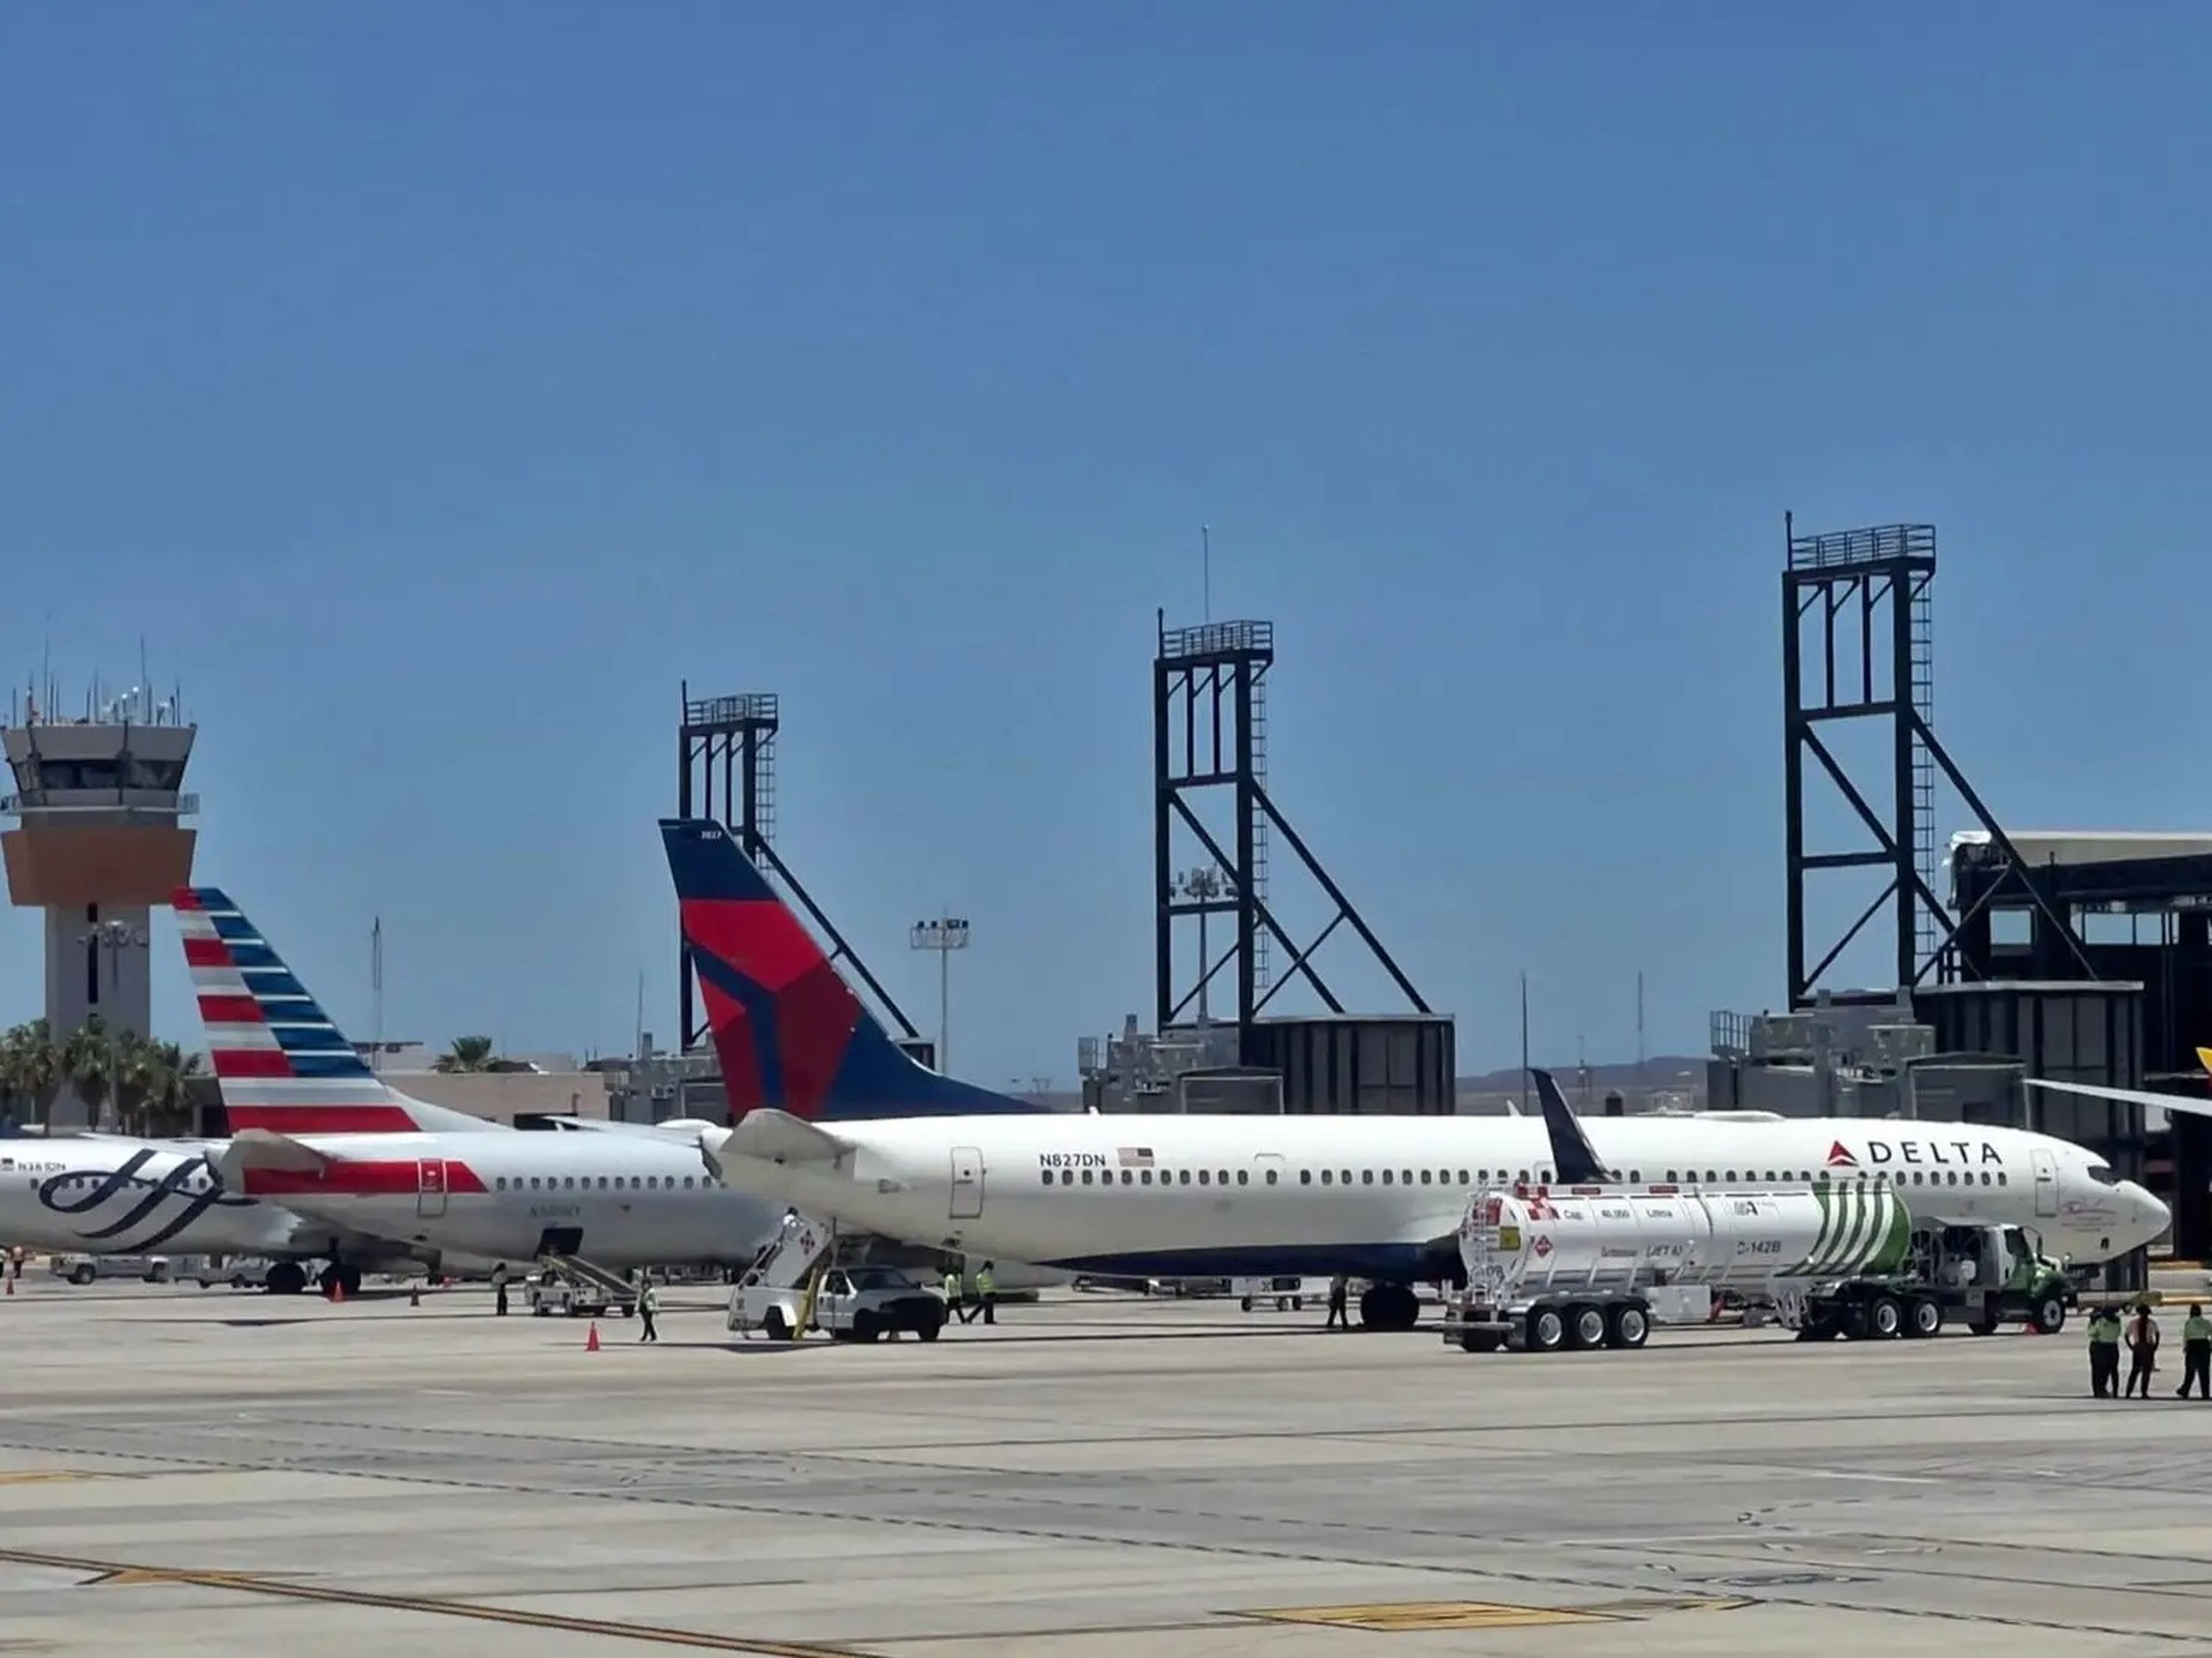 Southwest Airlines, Delta Air Lines, and American Airlines aircraft at an airport.